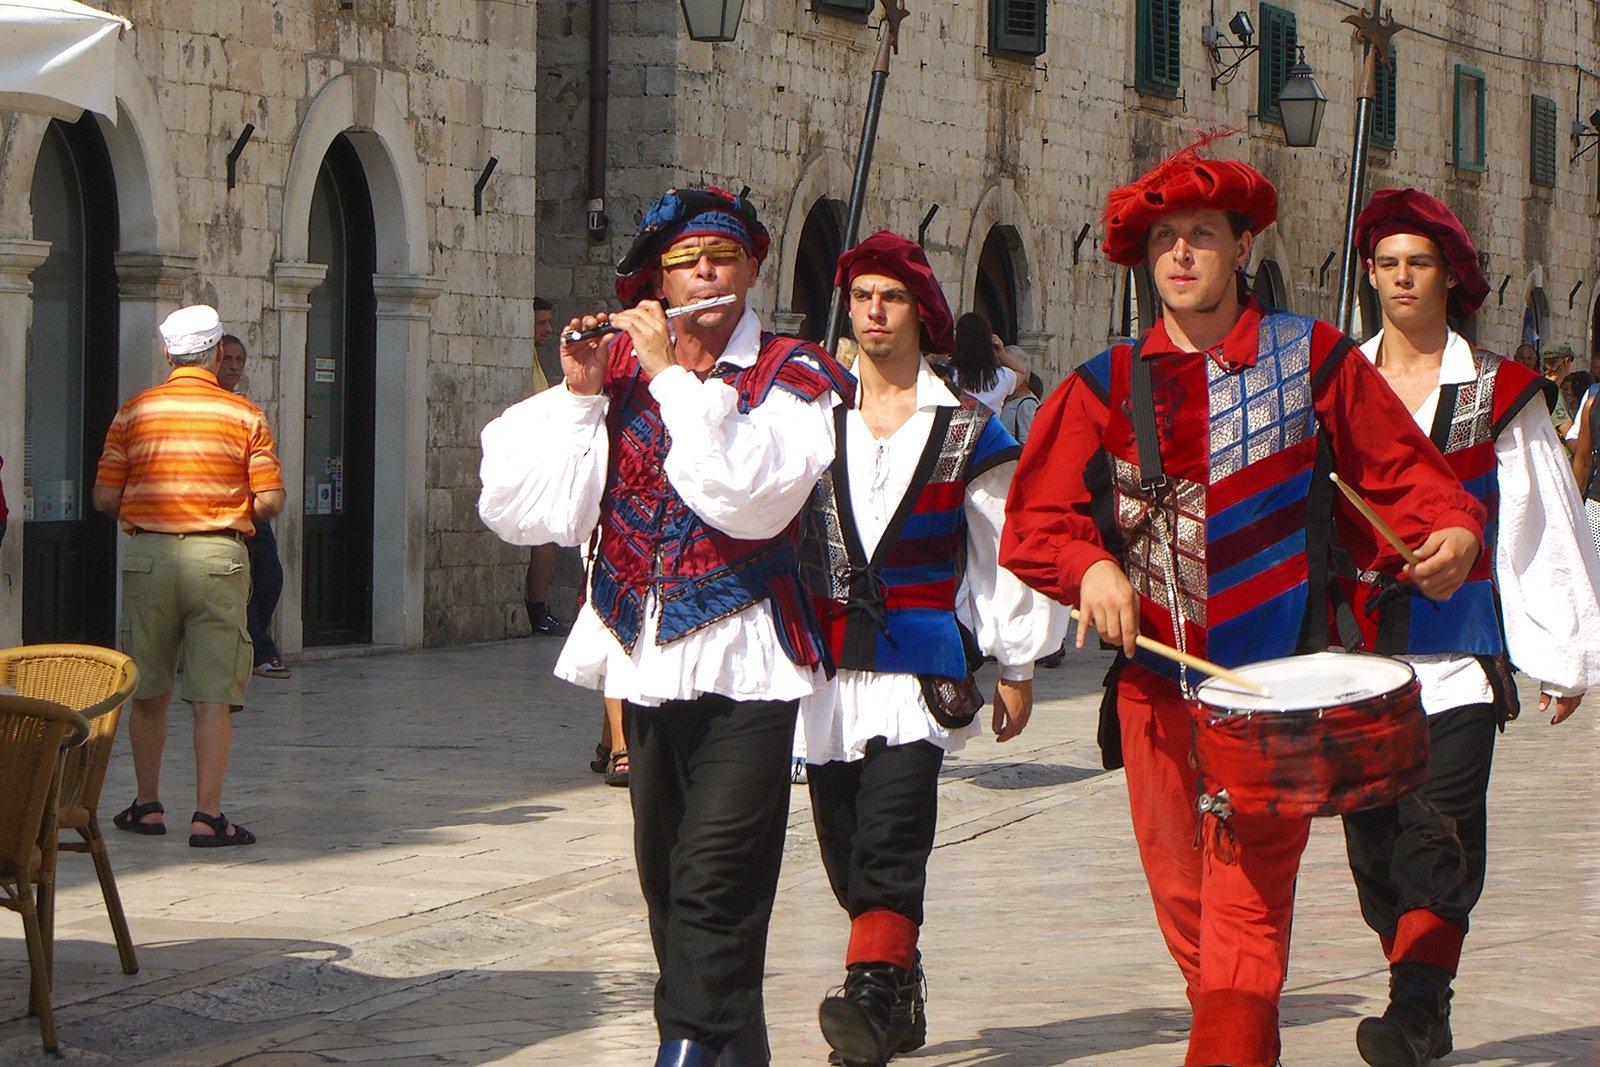 How to see the city guards of Dubrovnik in Dubrovnik